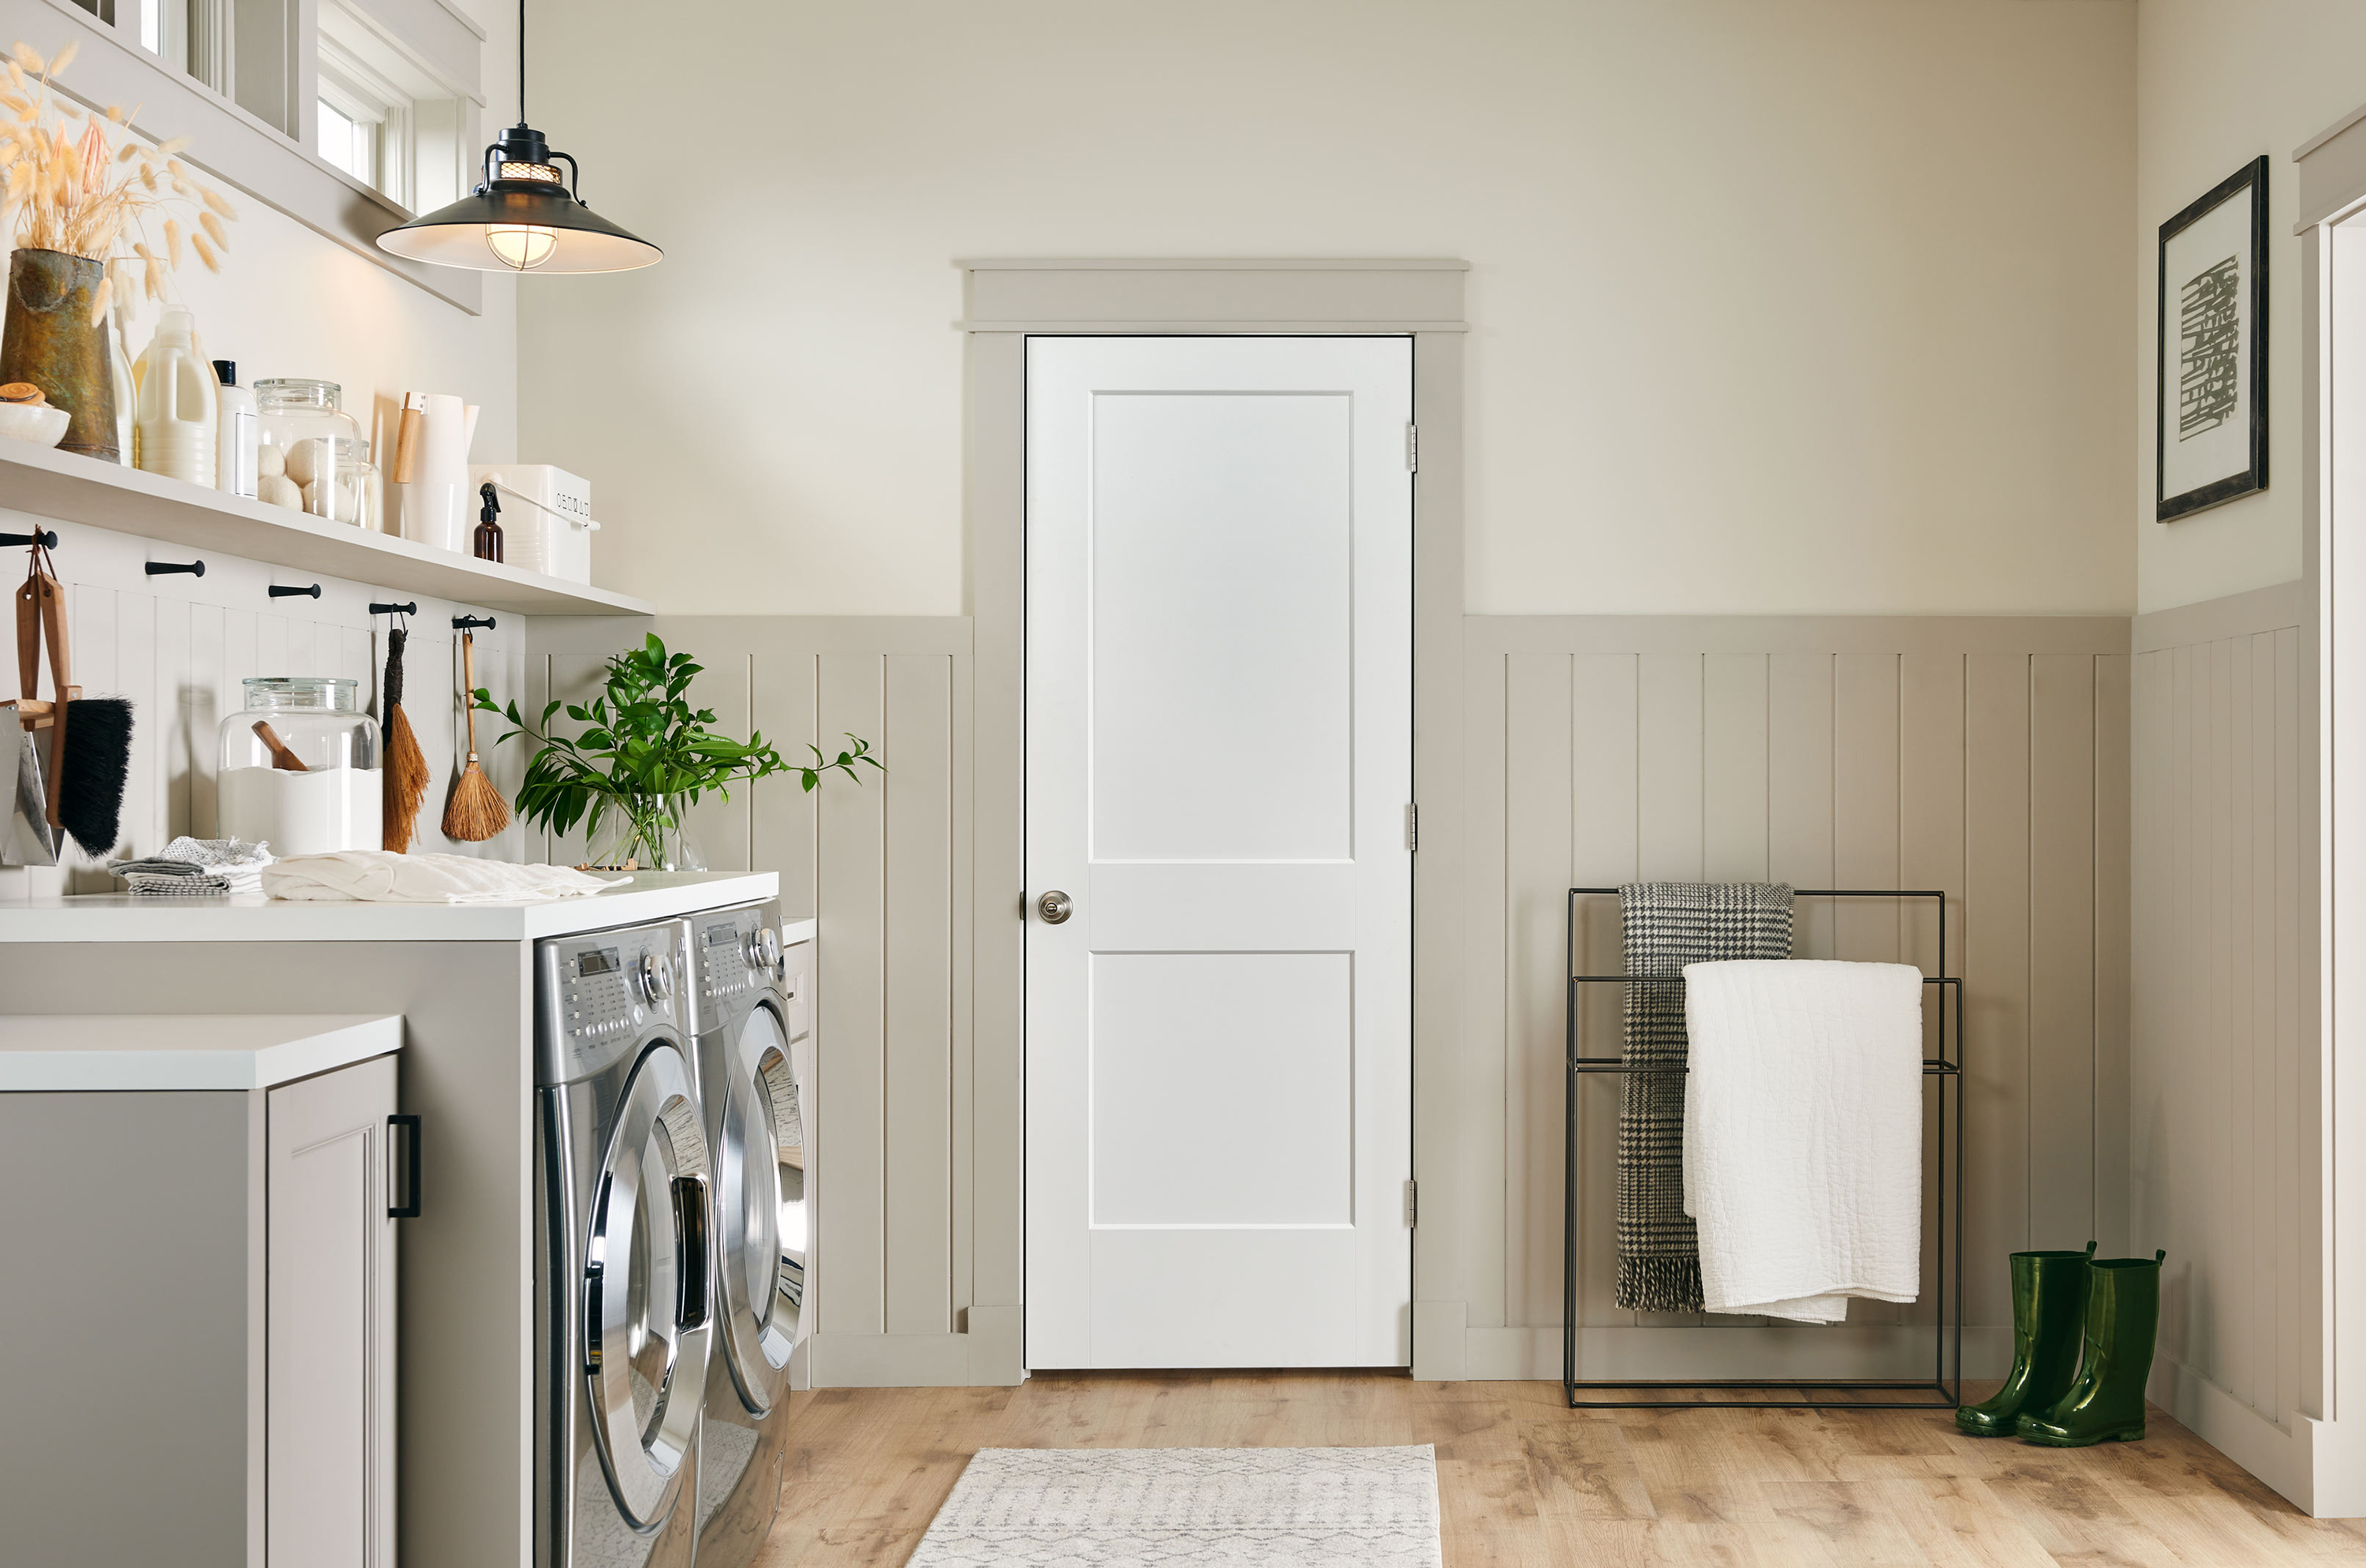 The interior of a transitional-style laundry room with gray wainscotting halfway up and a white two-panel door